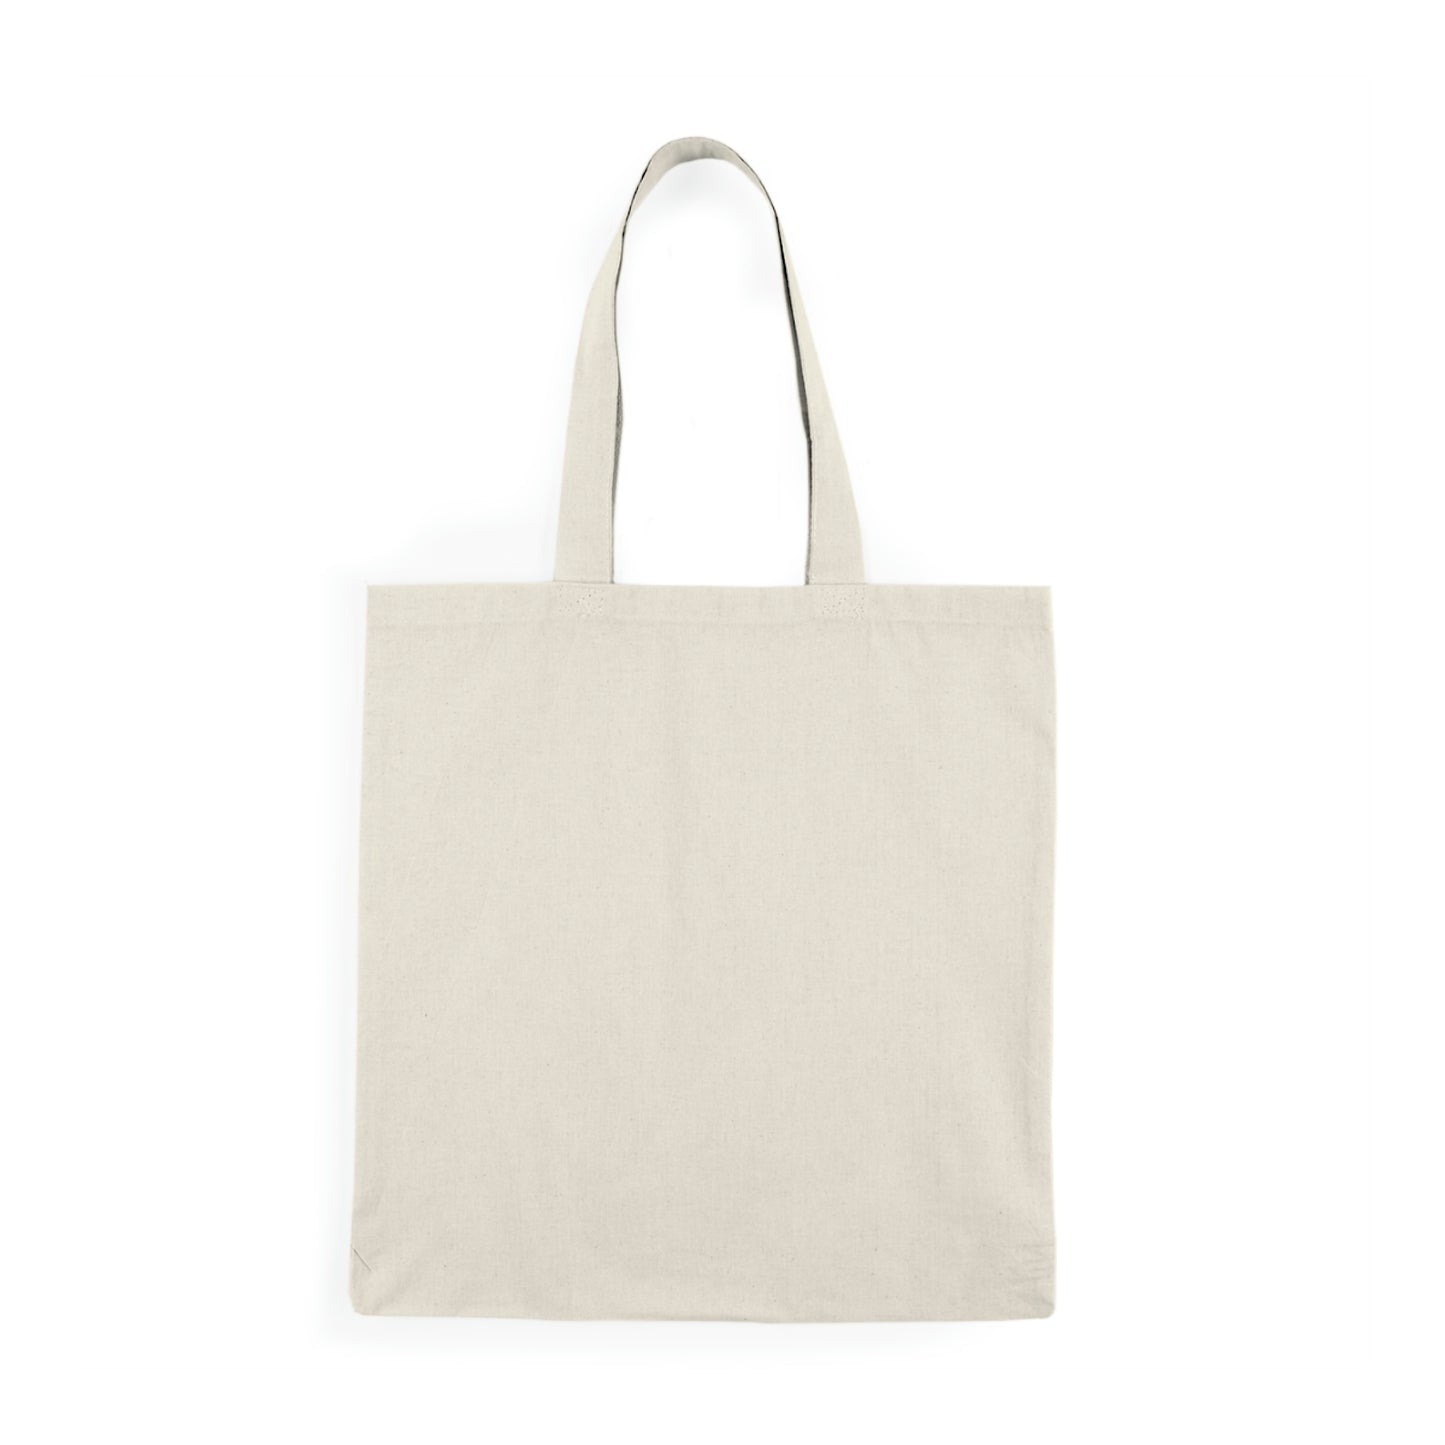 Playing in The Rain - Natural Tote Bag